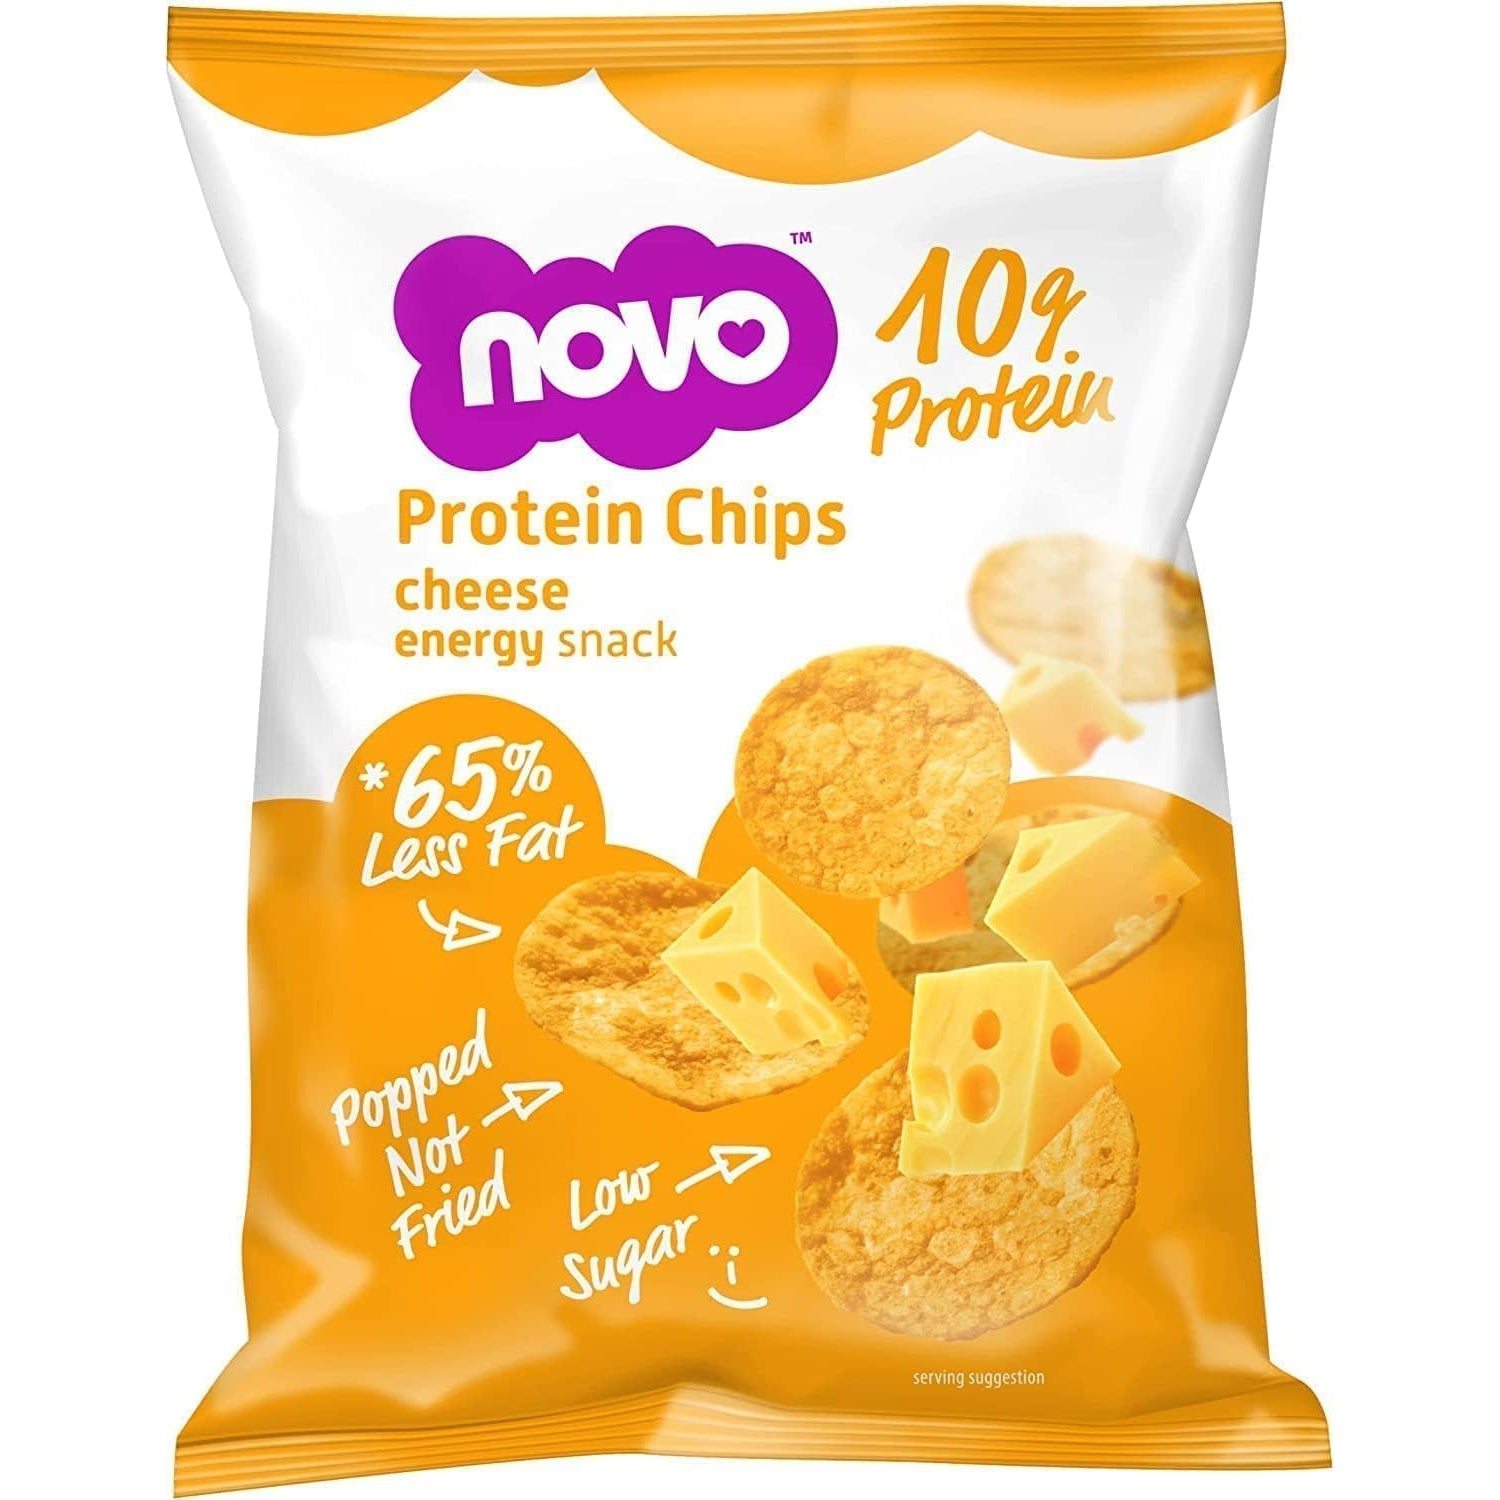 Novo Nutrition Protein Chips Healthy Savoury Snack with High Protein 30g - Cheese Flavour